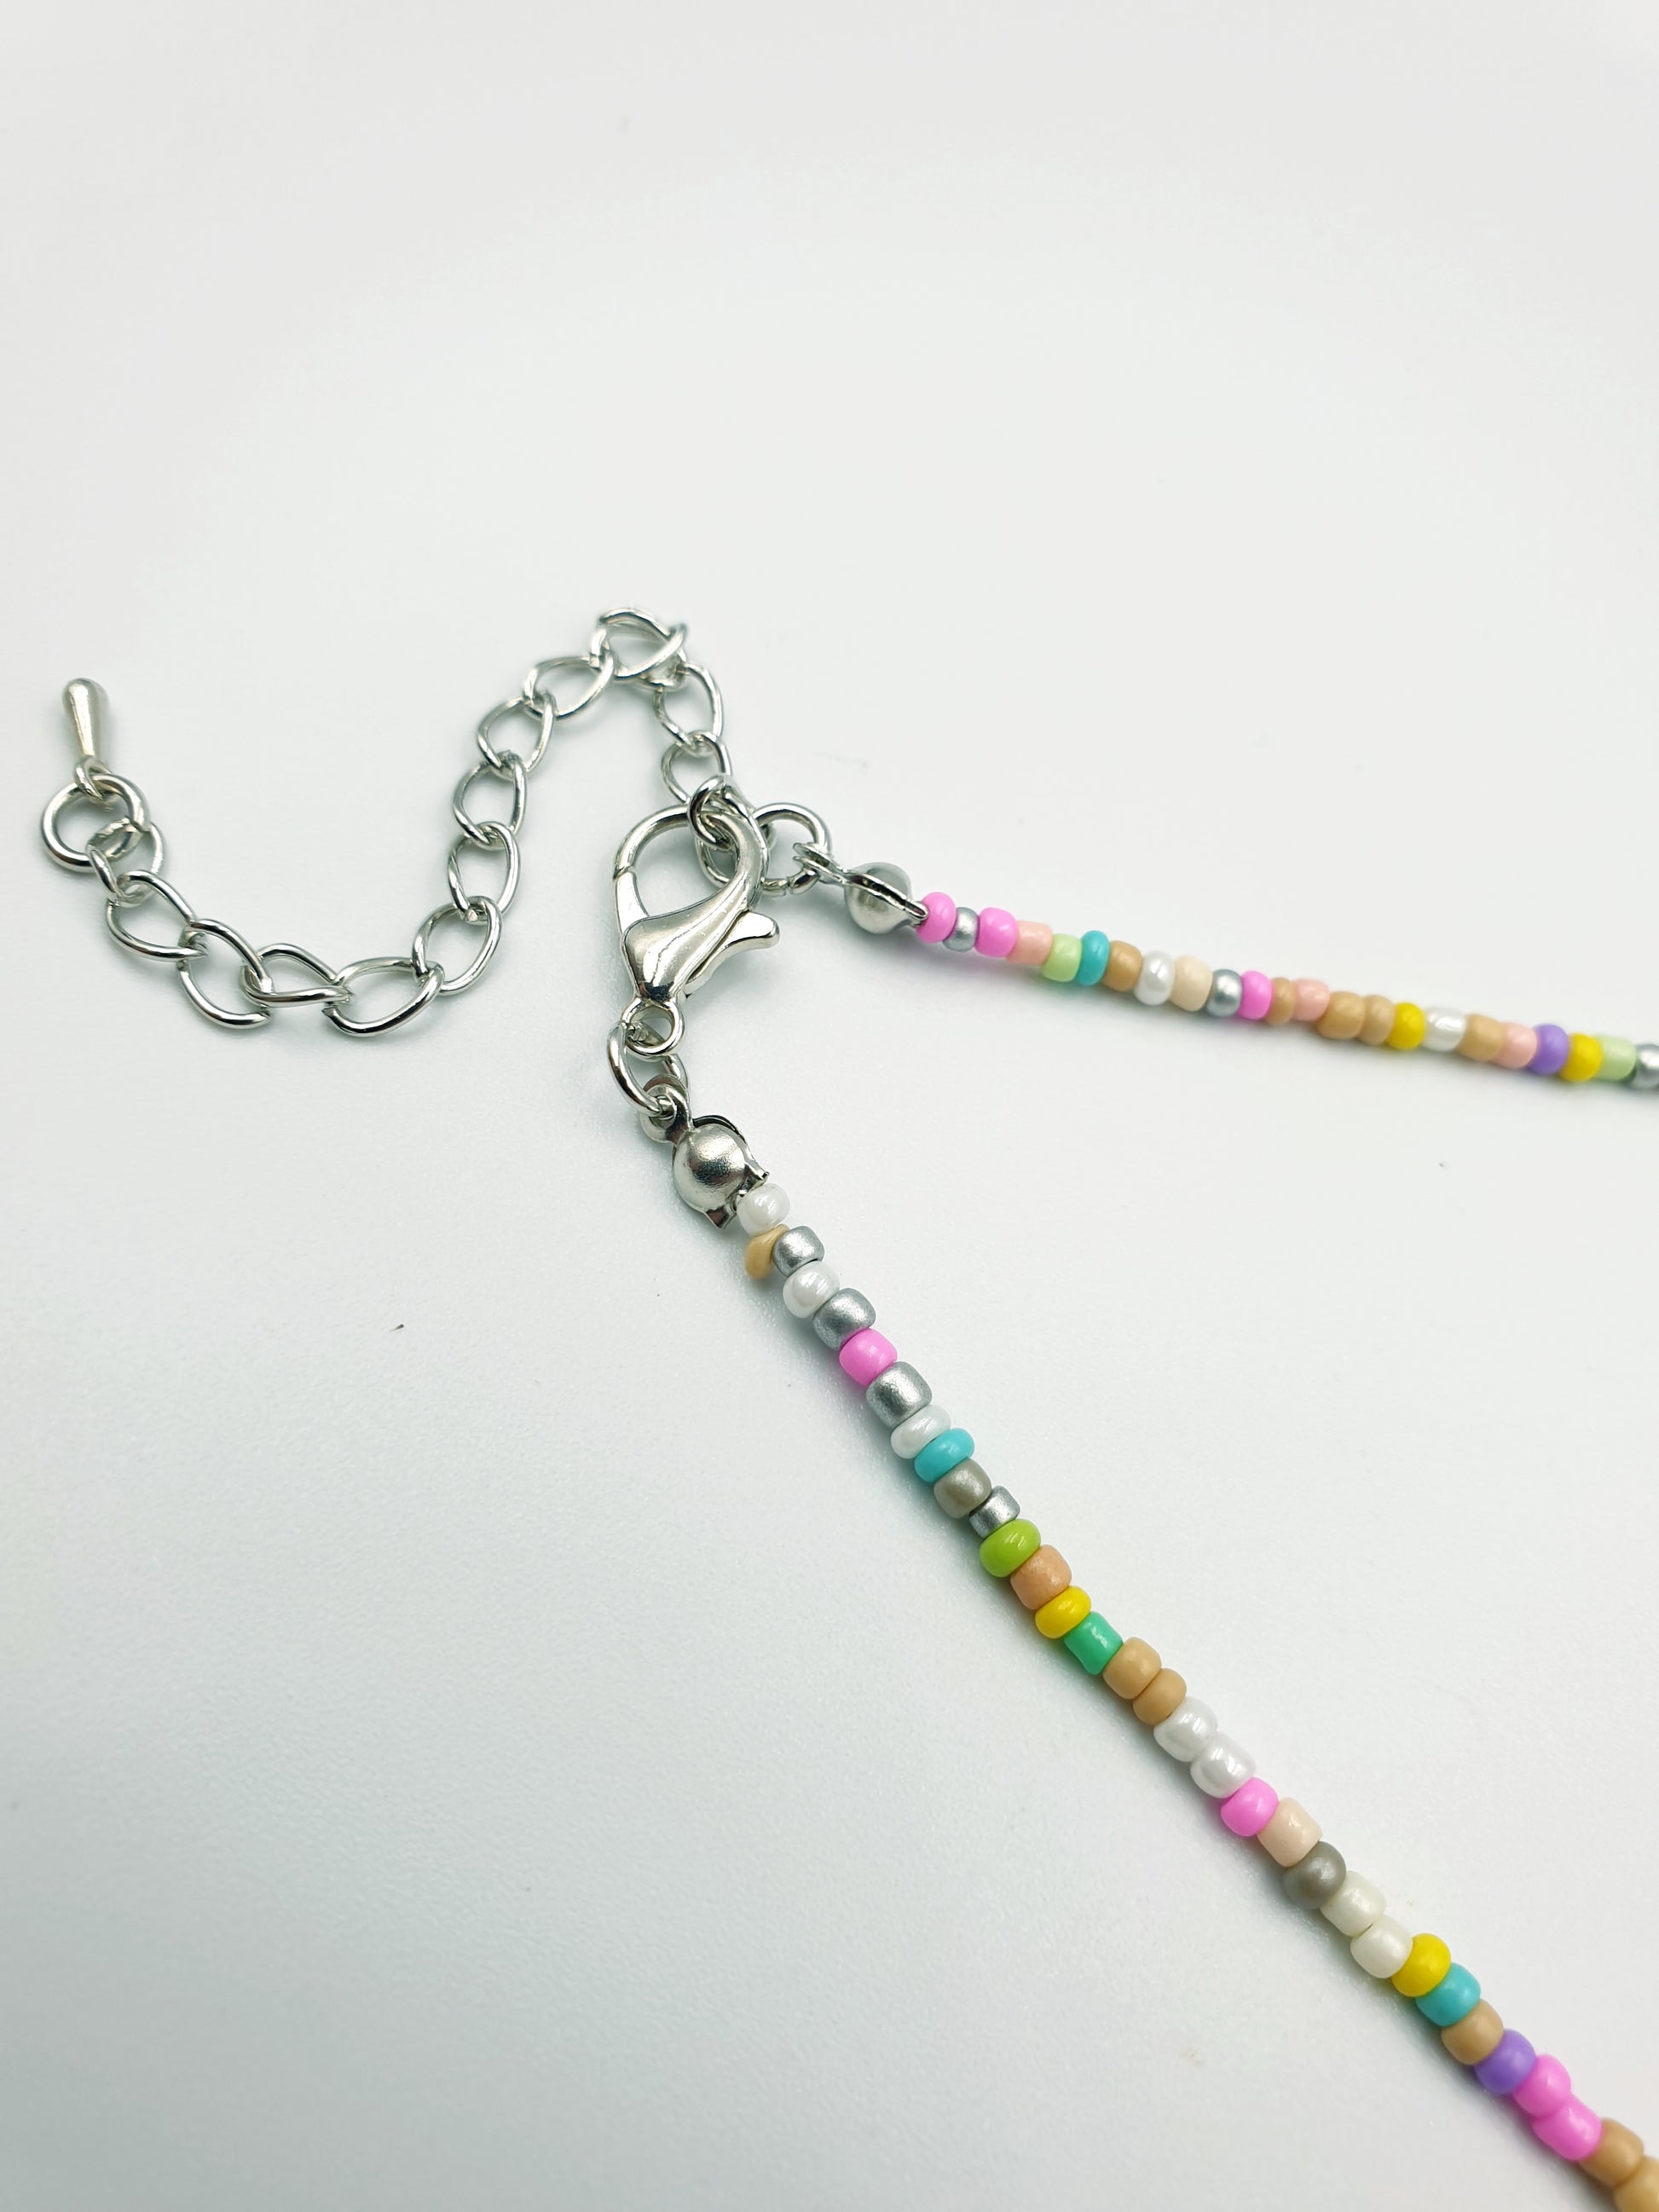 Beaded necklace, beads, beaded necklace, girls jewelery, ladies necklace, choker necklace, unique gifts, popular, 90s vibes, boho, bohemian jewelery, funky jewerery, summer vibes, Rainbow